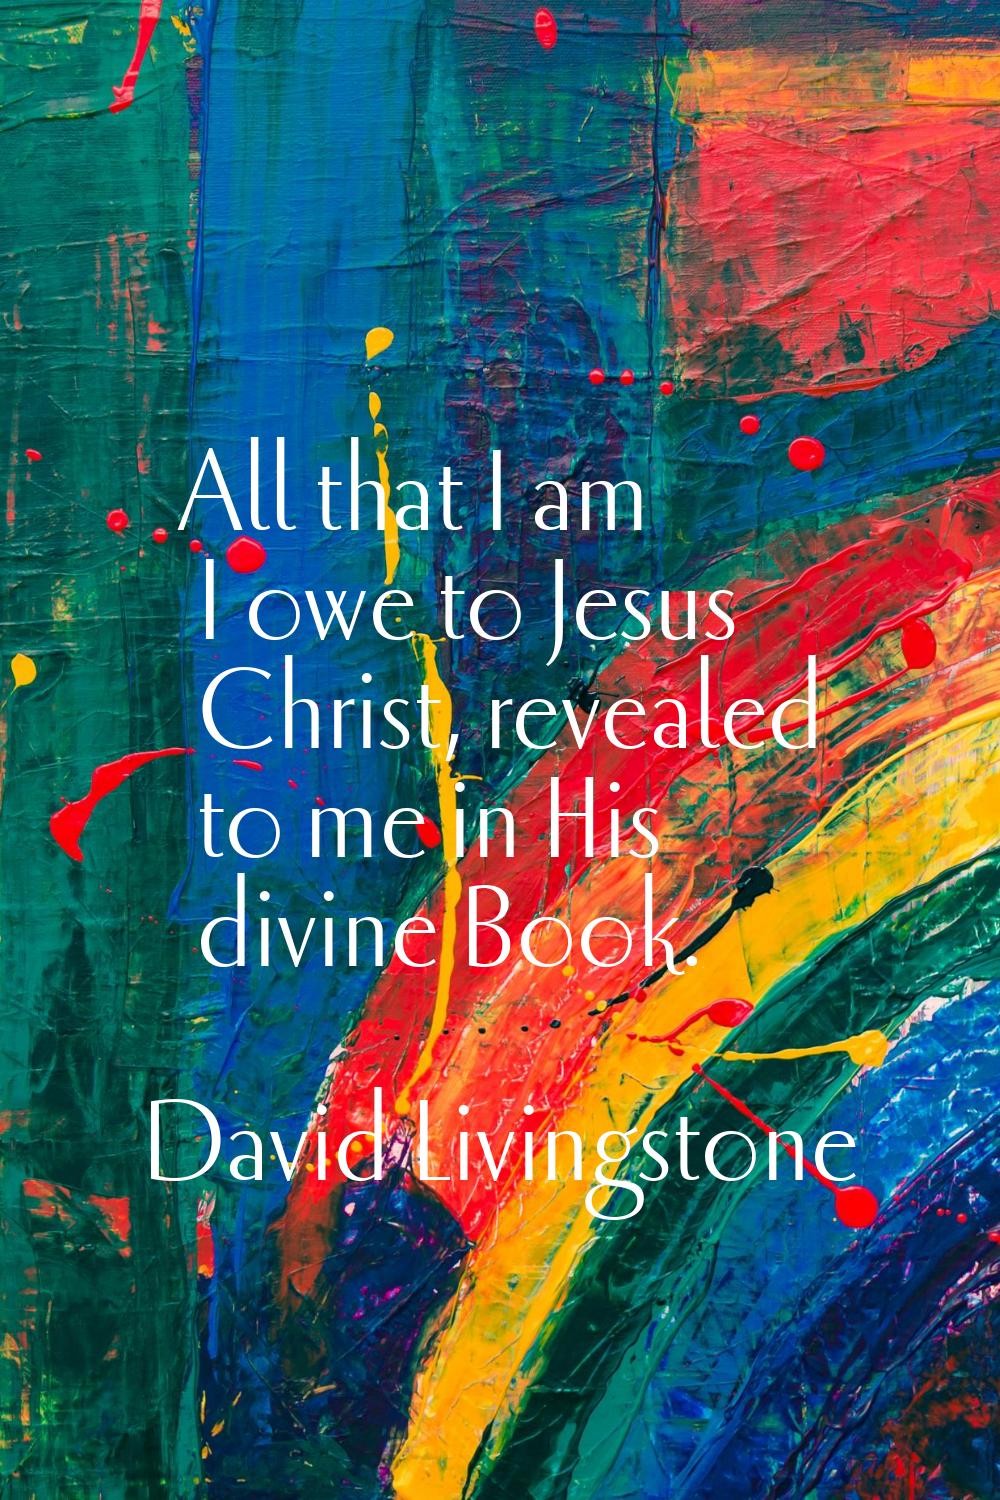 All that I am I owe to Jesus Christ, revealed to me in His divine Book.